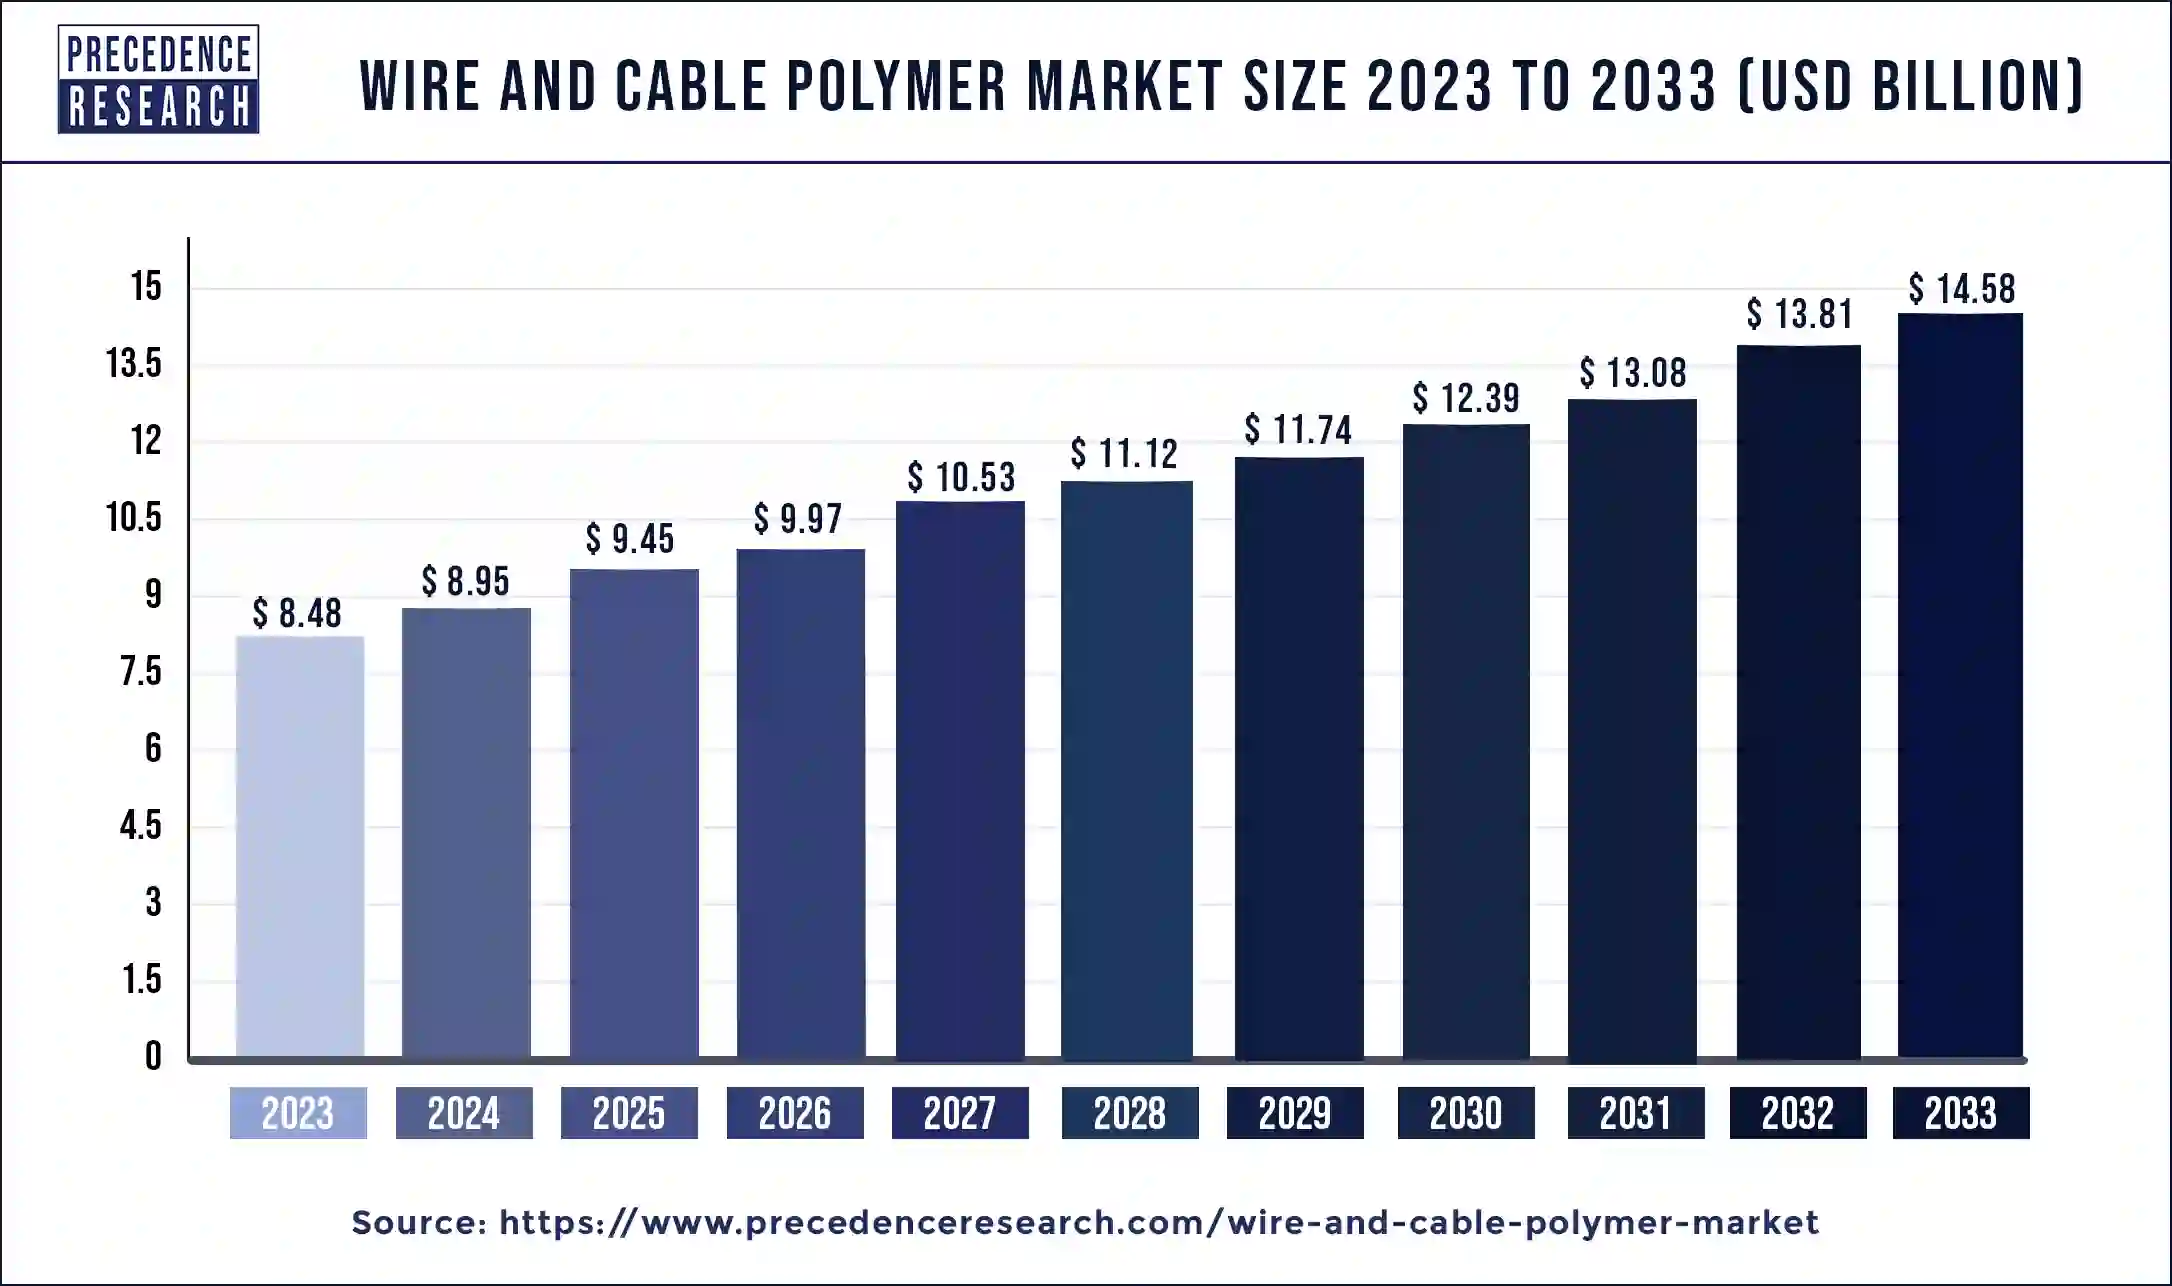 Wire and Cable Polymer Market Size 2023 to 2033